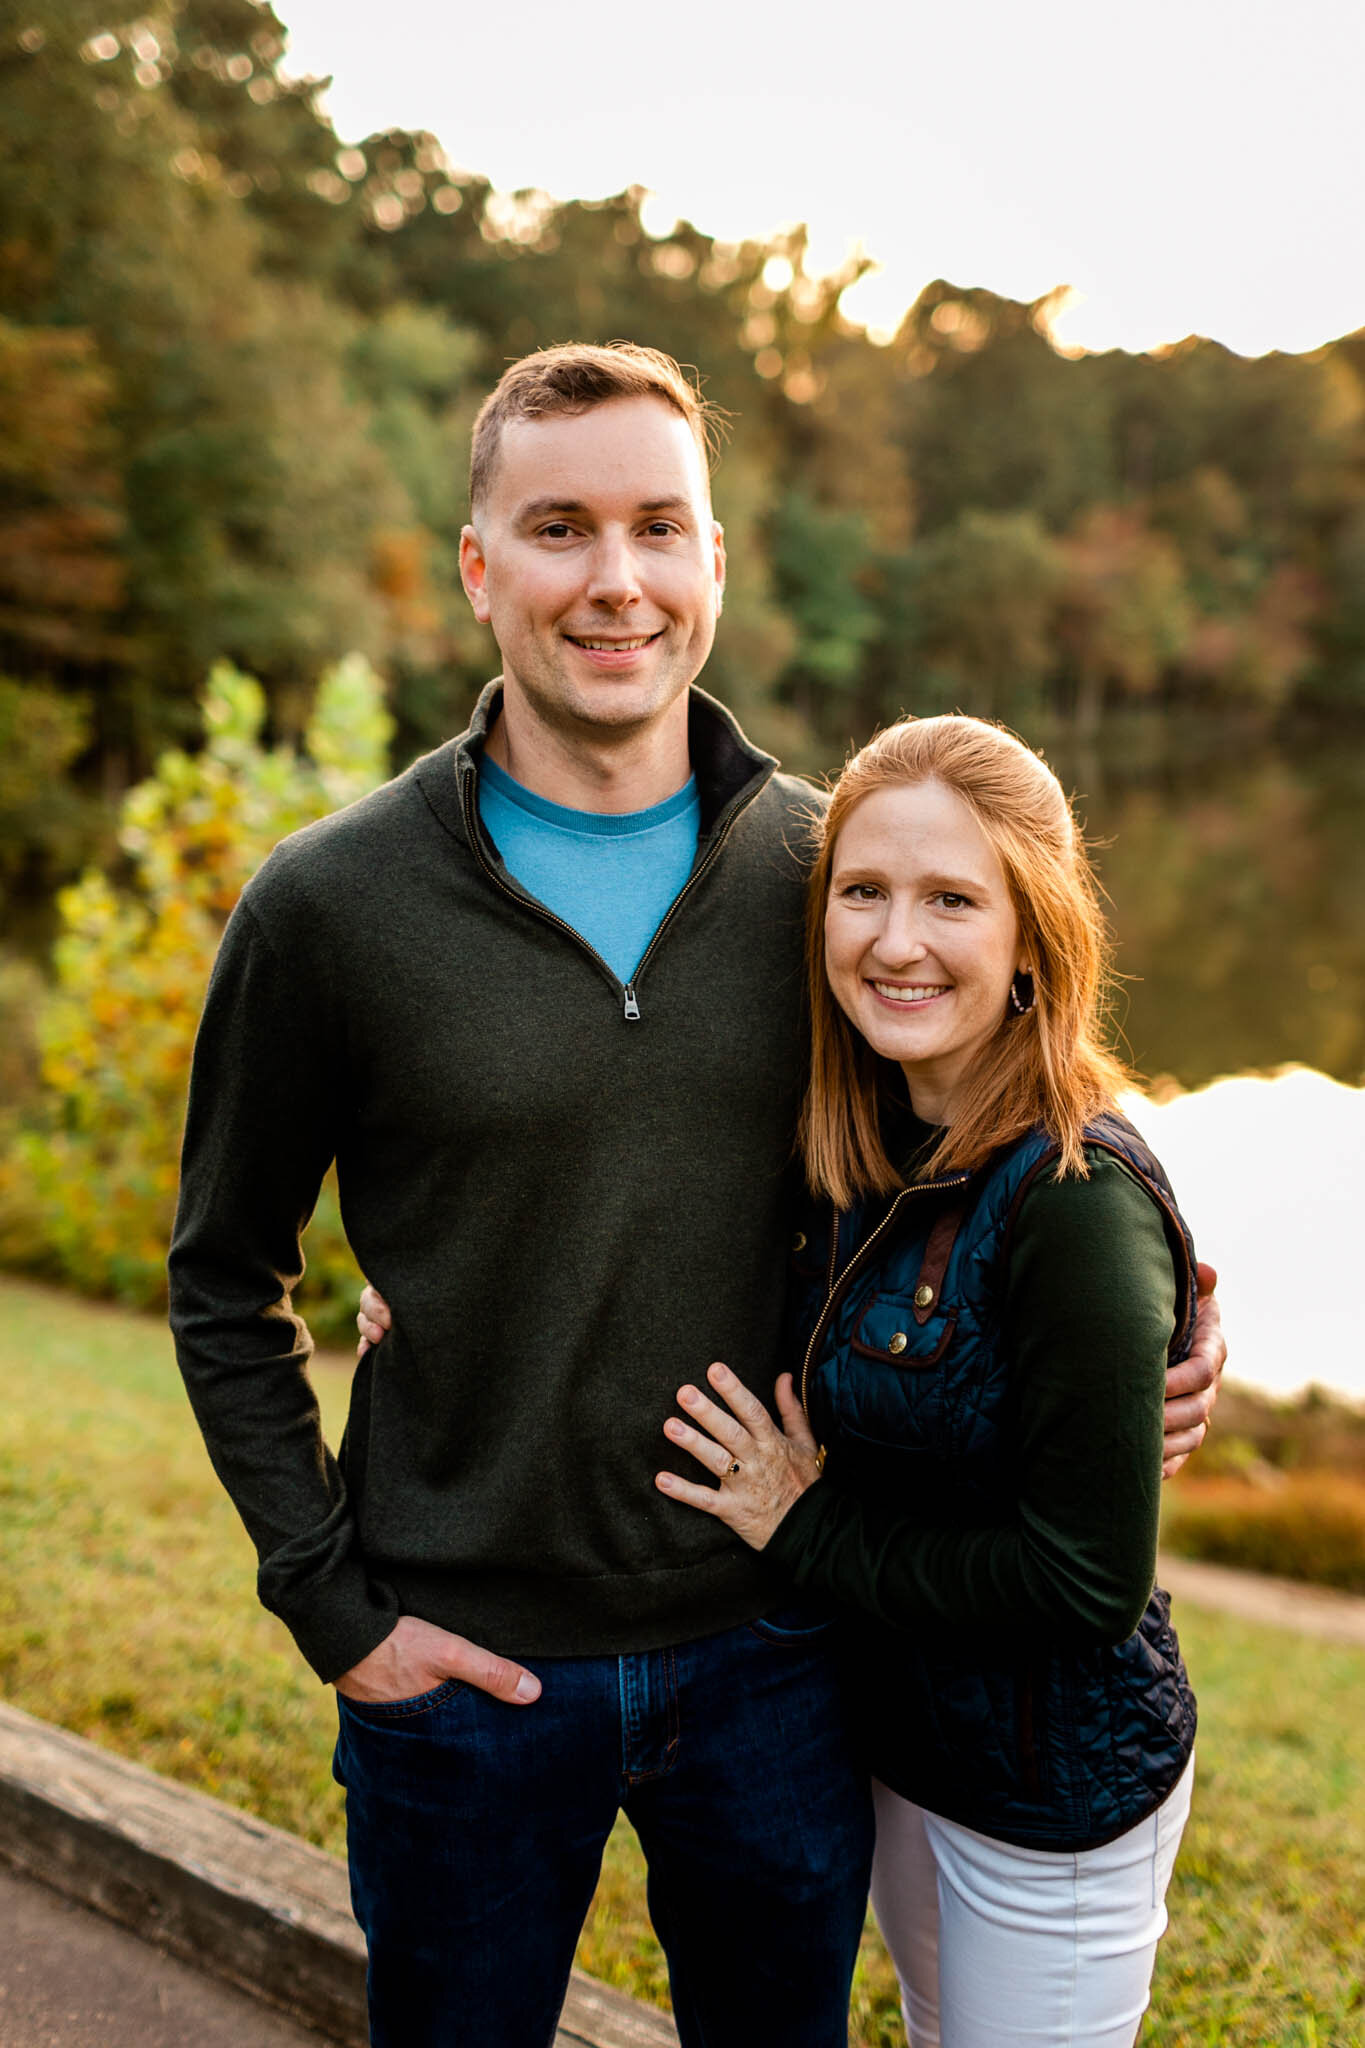 Raleigh Family Photographer | Umstead Park | By G. Lin Photography | Husband and wife portrait